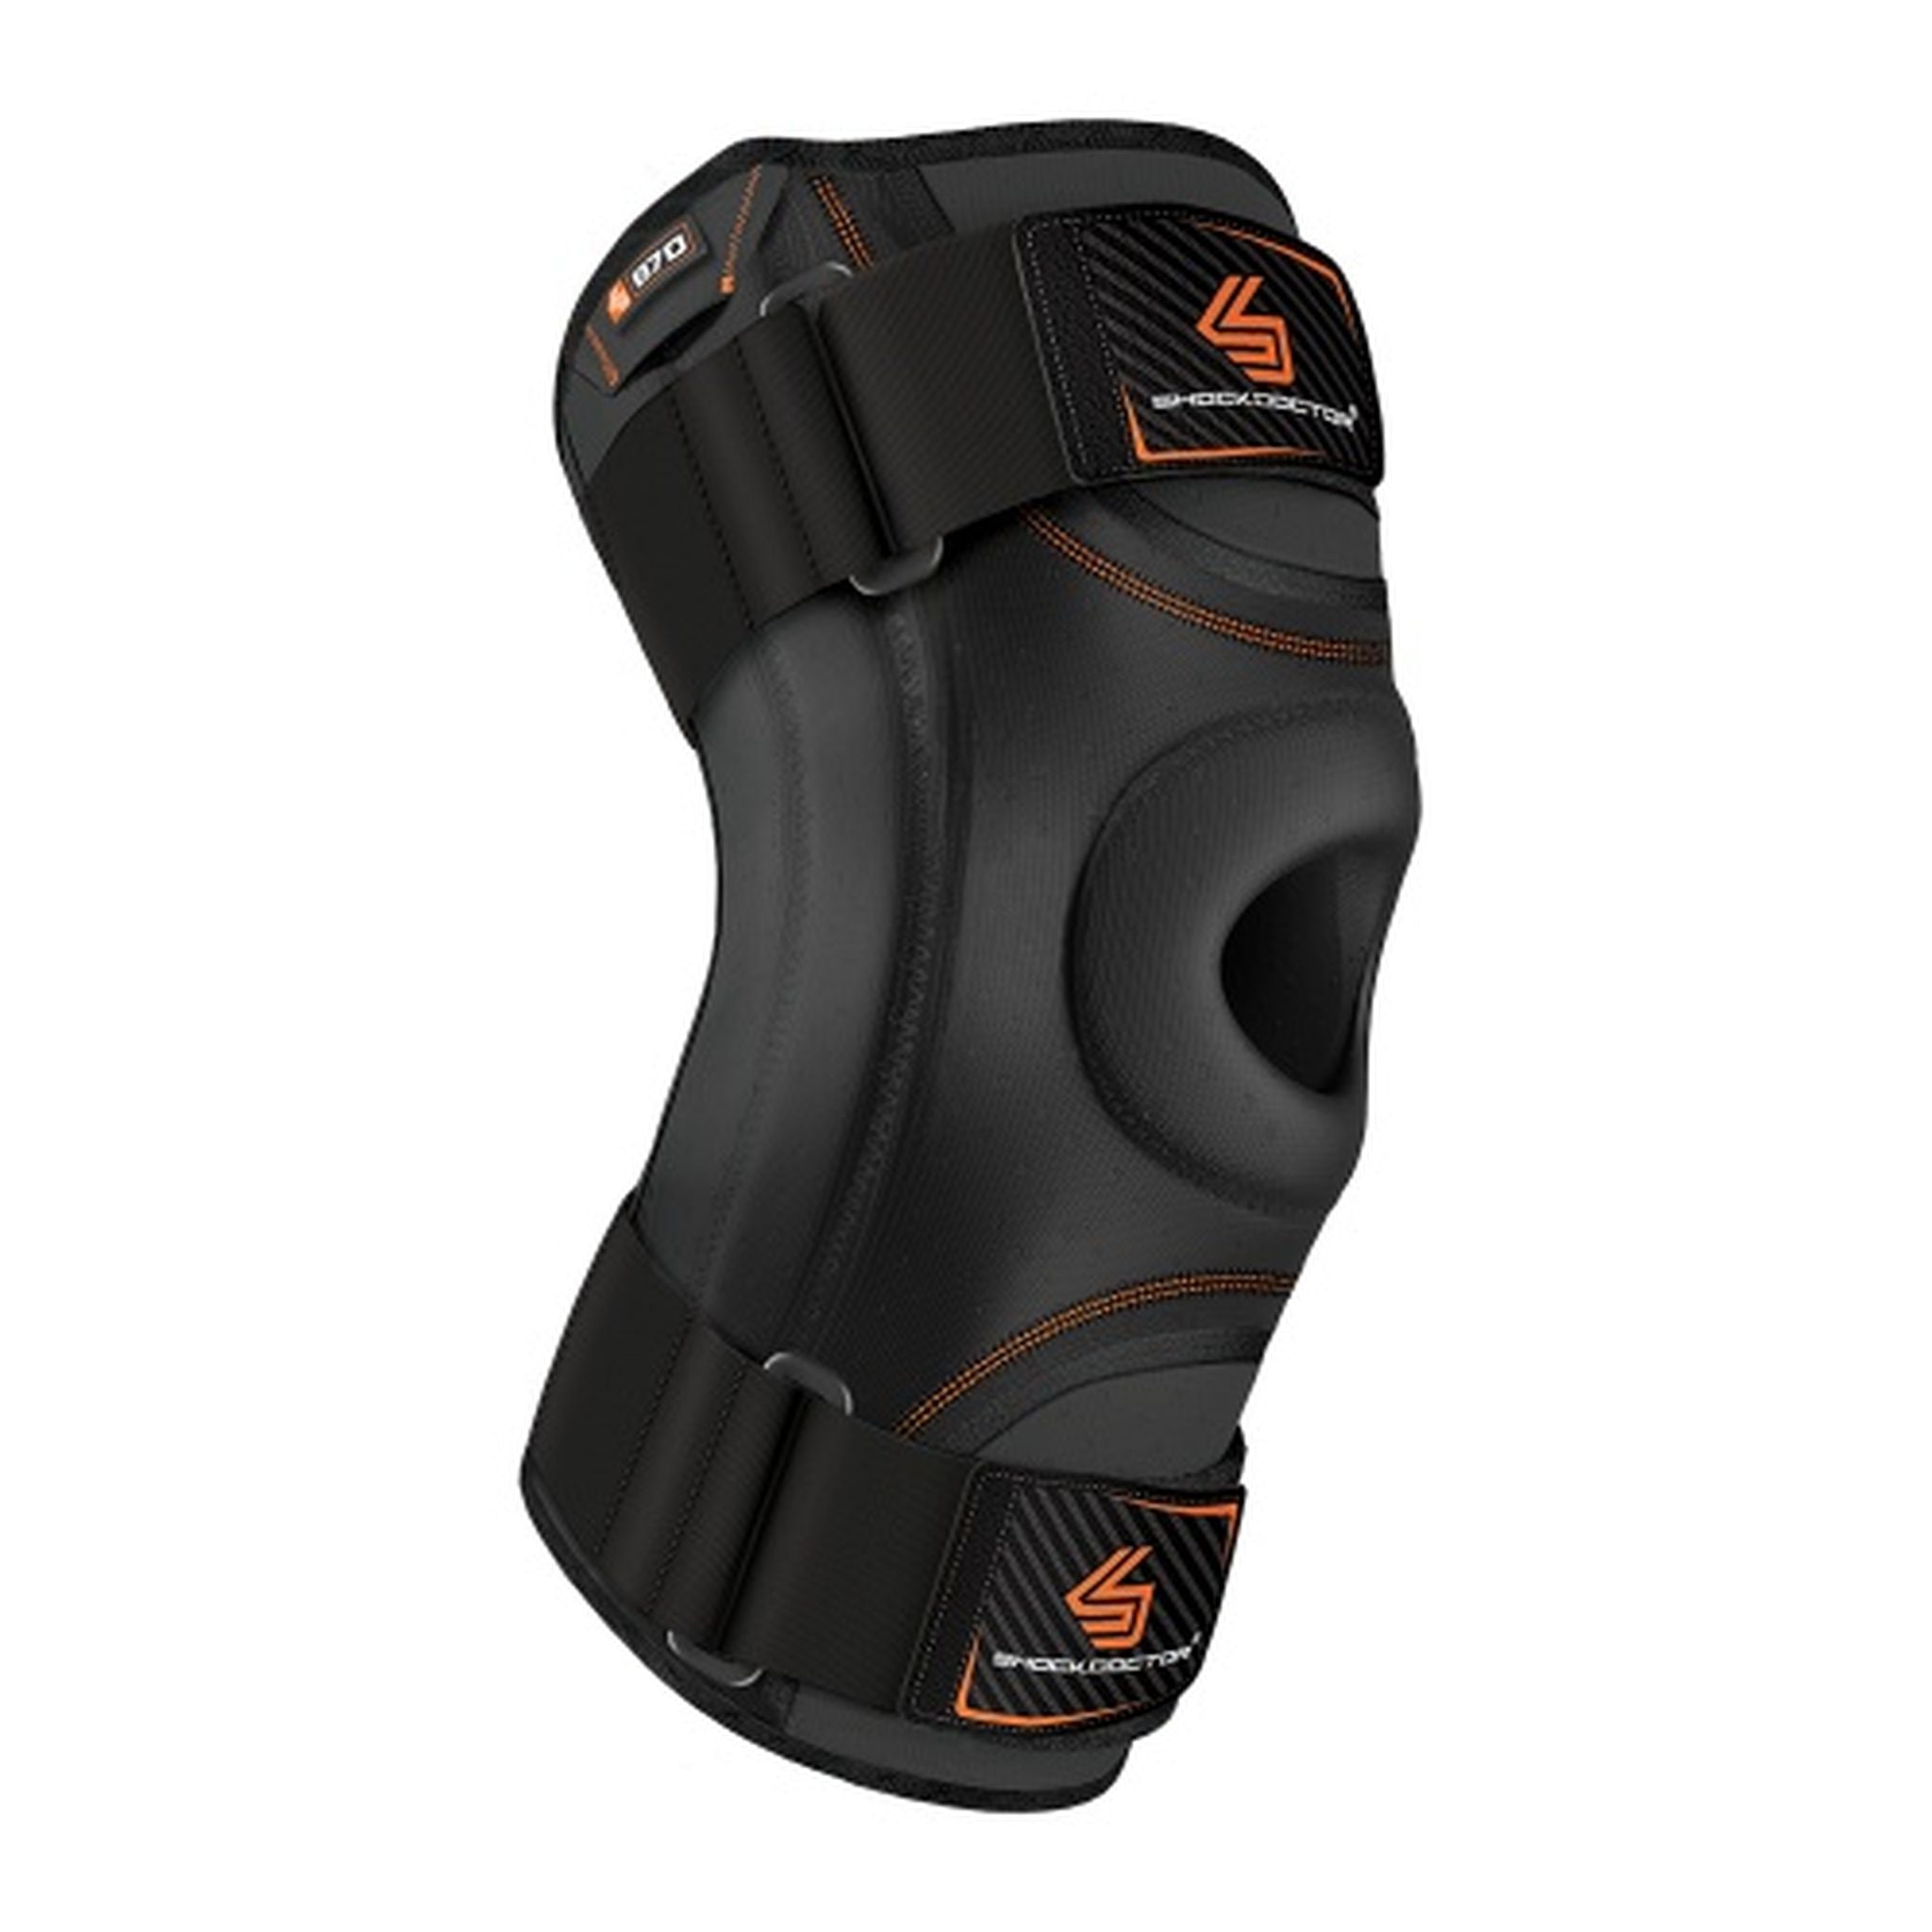 Shock Doctor Knee Stabilizer with Flexible Support